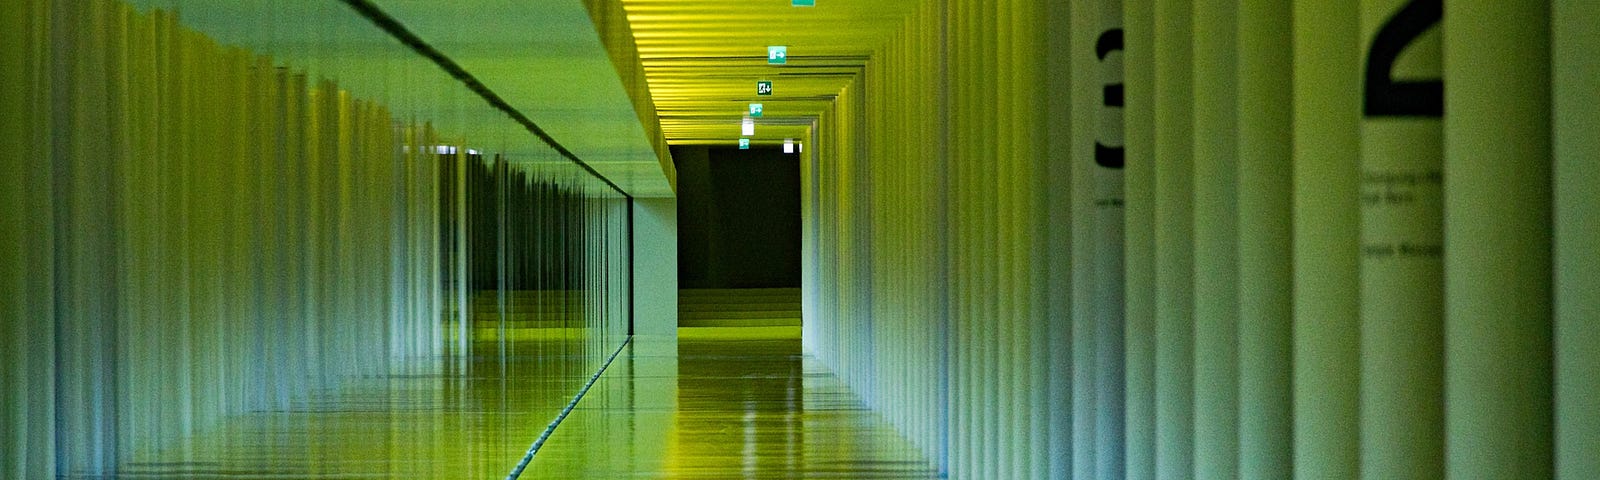 a long green hallway, bright and yet strange. A dark open door stands at the end.